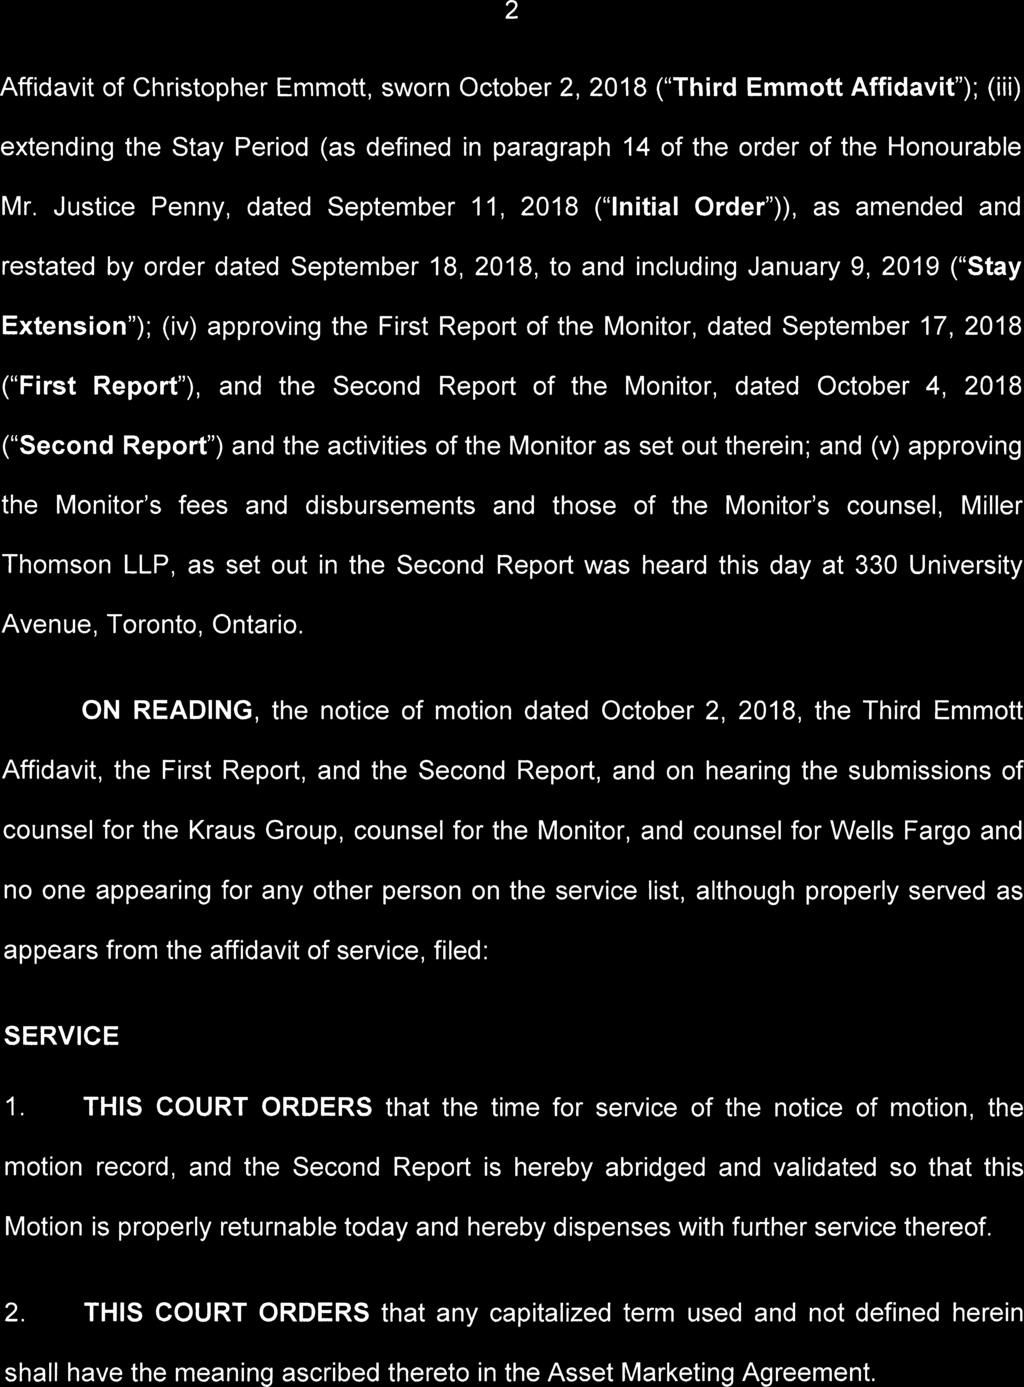 -2 - Affidavit of Christopher Emmott, sworn October 2, 2018 ("Third Emmott Affidavit"); (iii) extending the Stay Period (as defined in paragraph 14 of the order of the Honourable Mr.